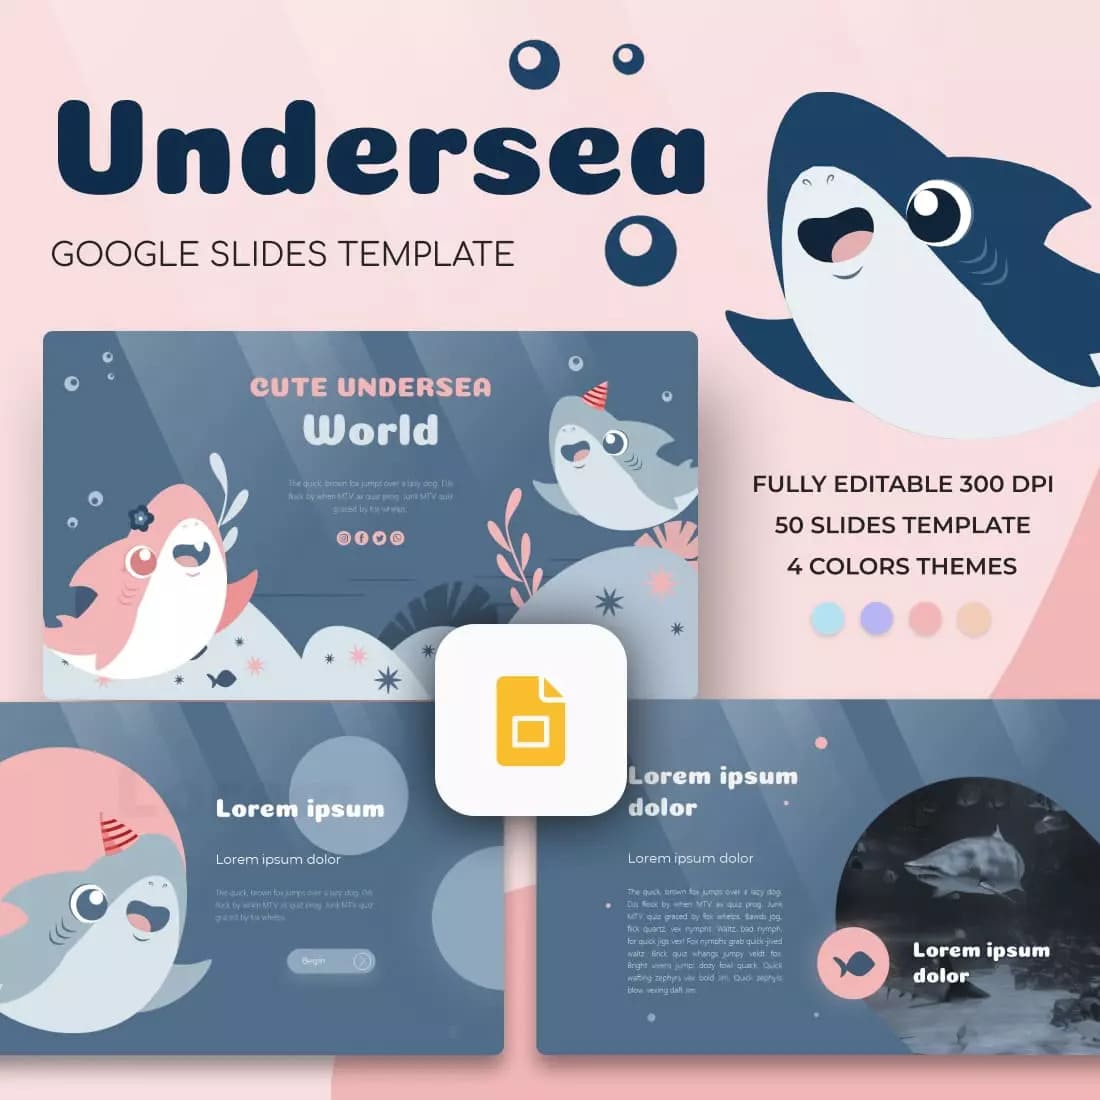 Undersea Google Slides Template Preview 5 1.